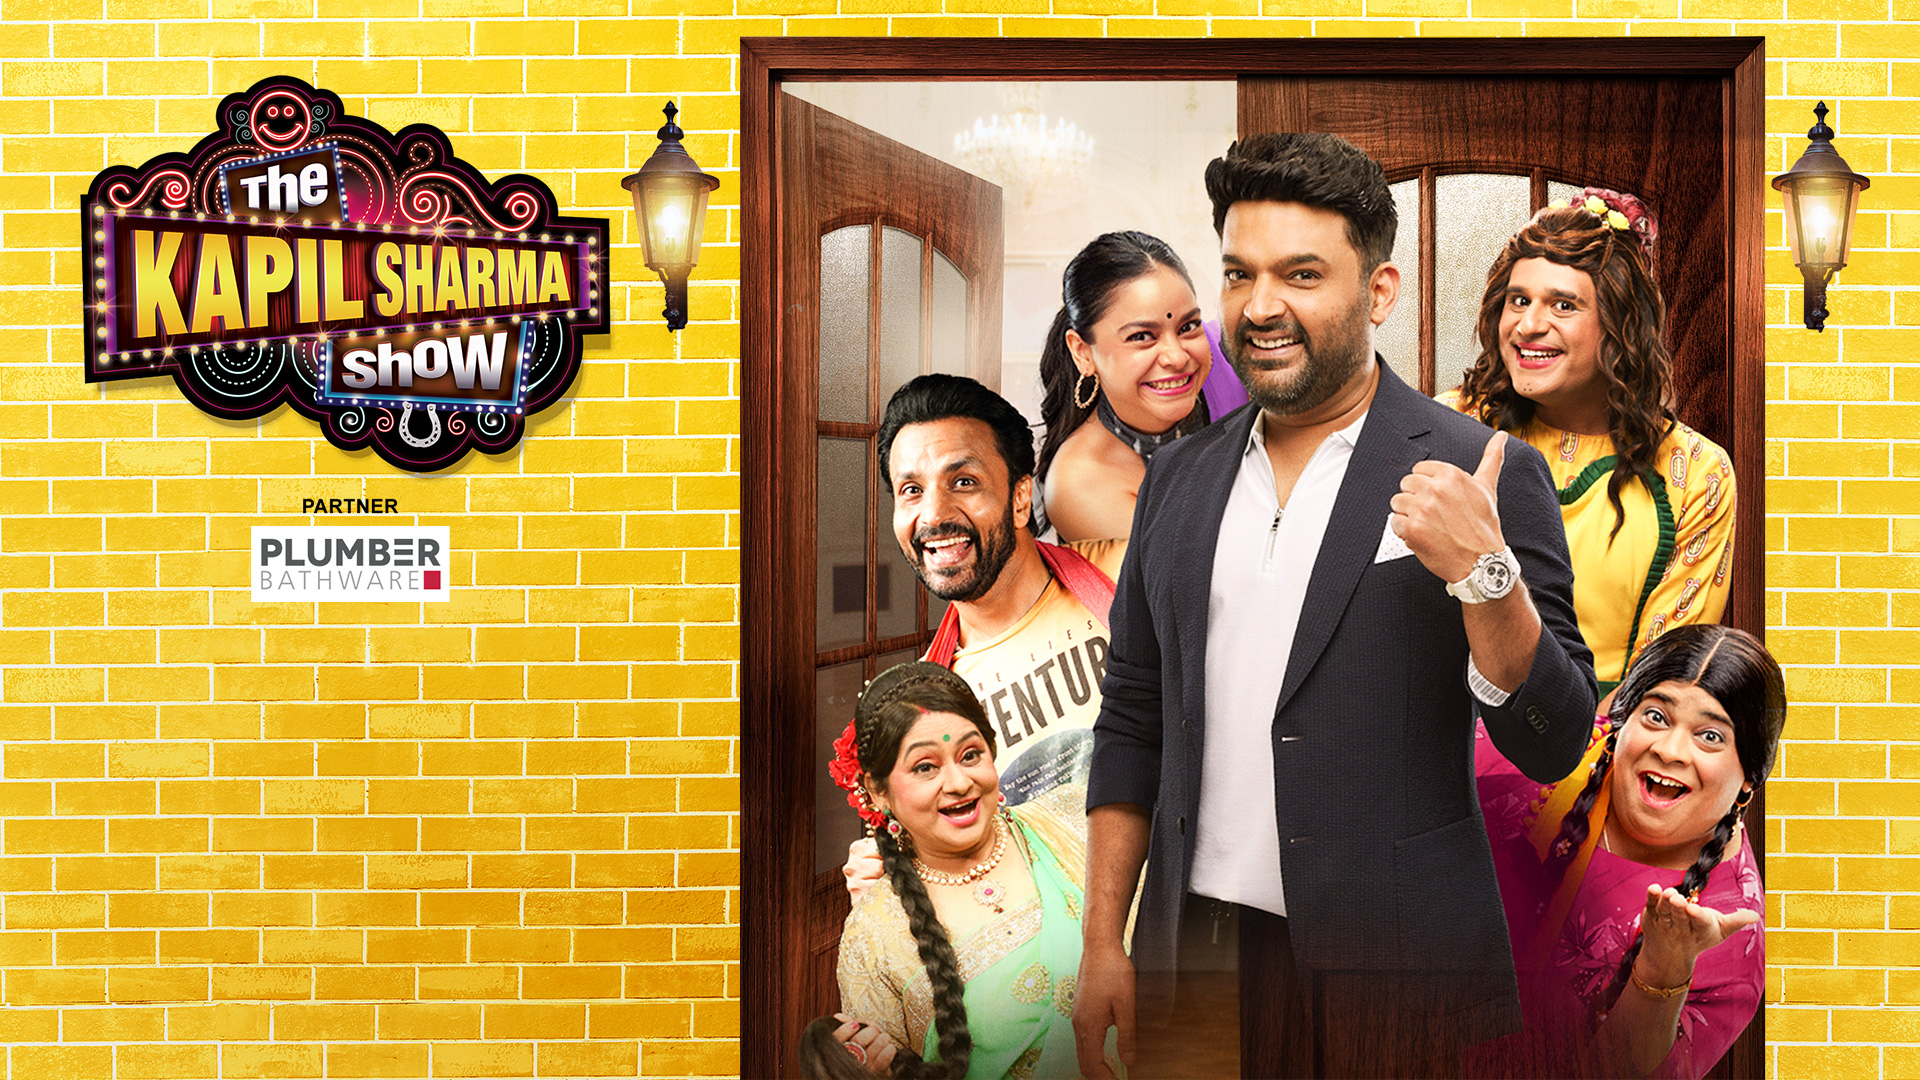 The Laughter Continues: A Deep Dive into the Kapil Sharma Show